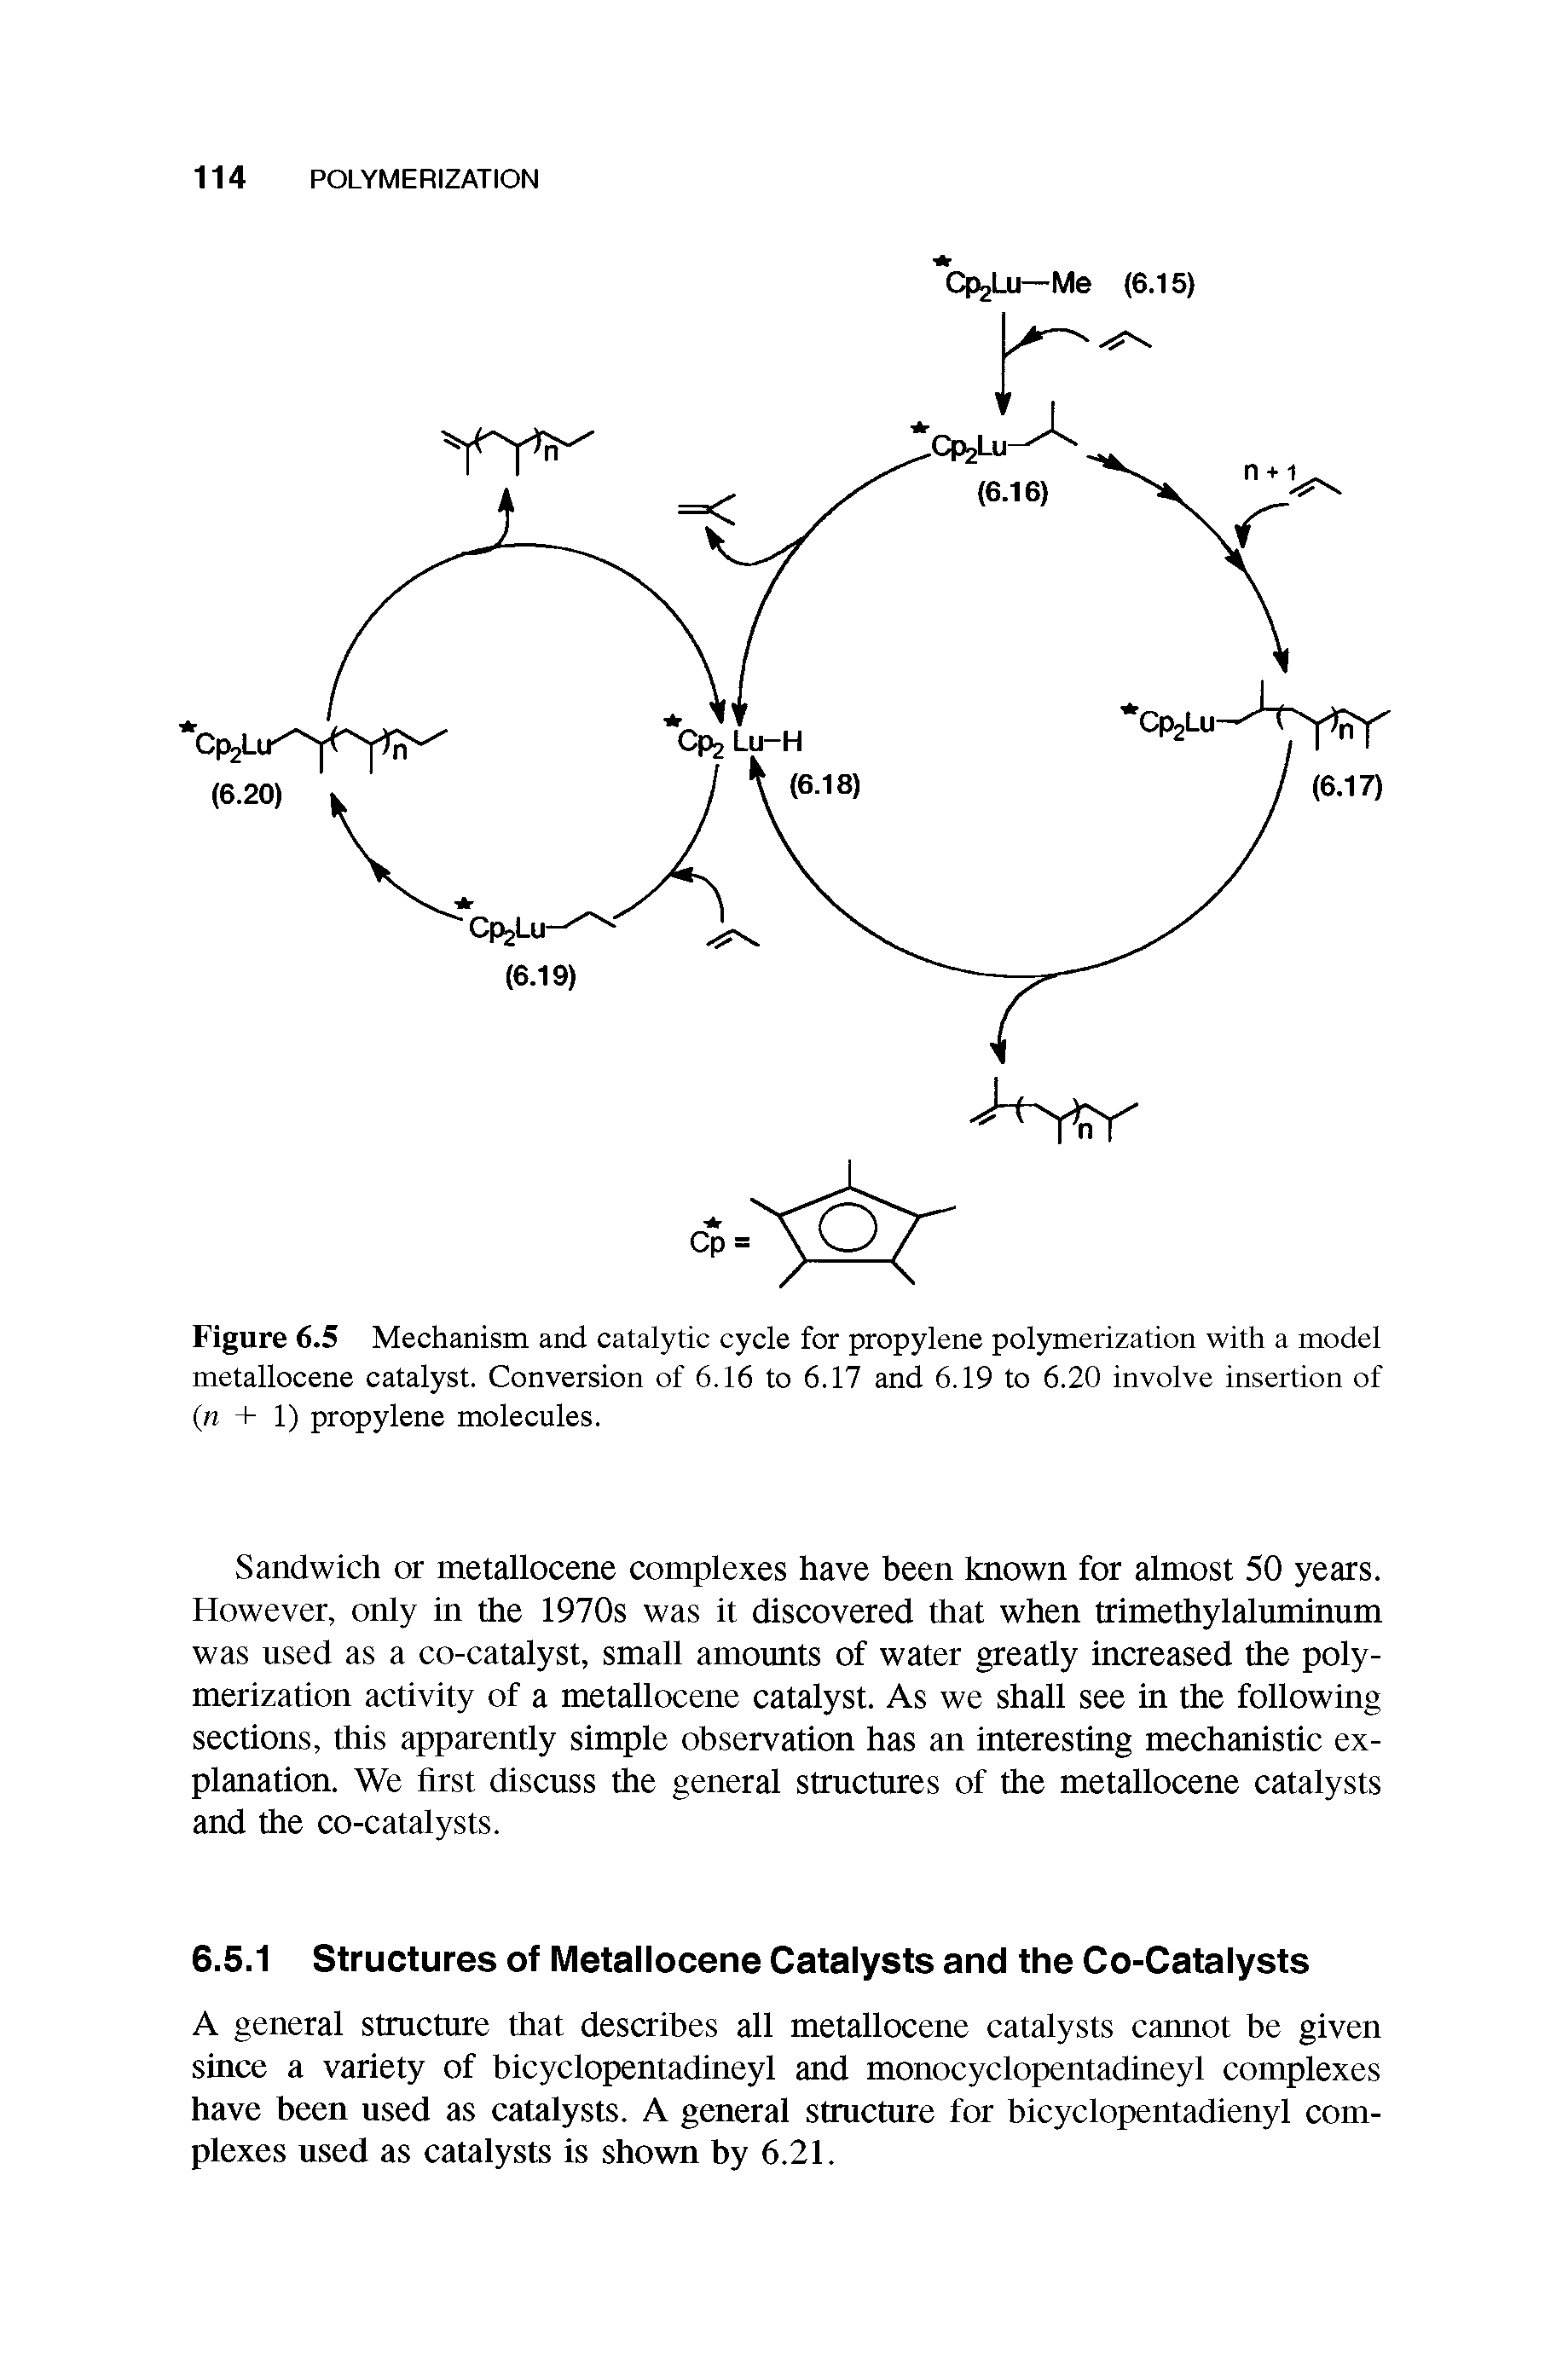 Figure 6.5 Mechanism and catalytic cycle for propylene polymerization with a model metallocene catalyst. Conversion of 6.16 to 6.17 and 6.19 to 6.20 involve insertion of (n + 1) propylene molecules.